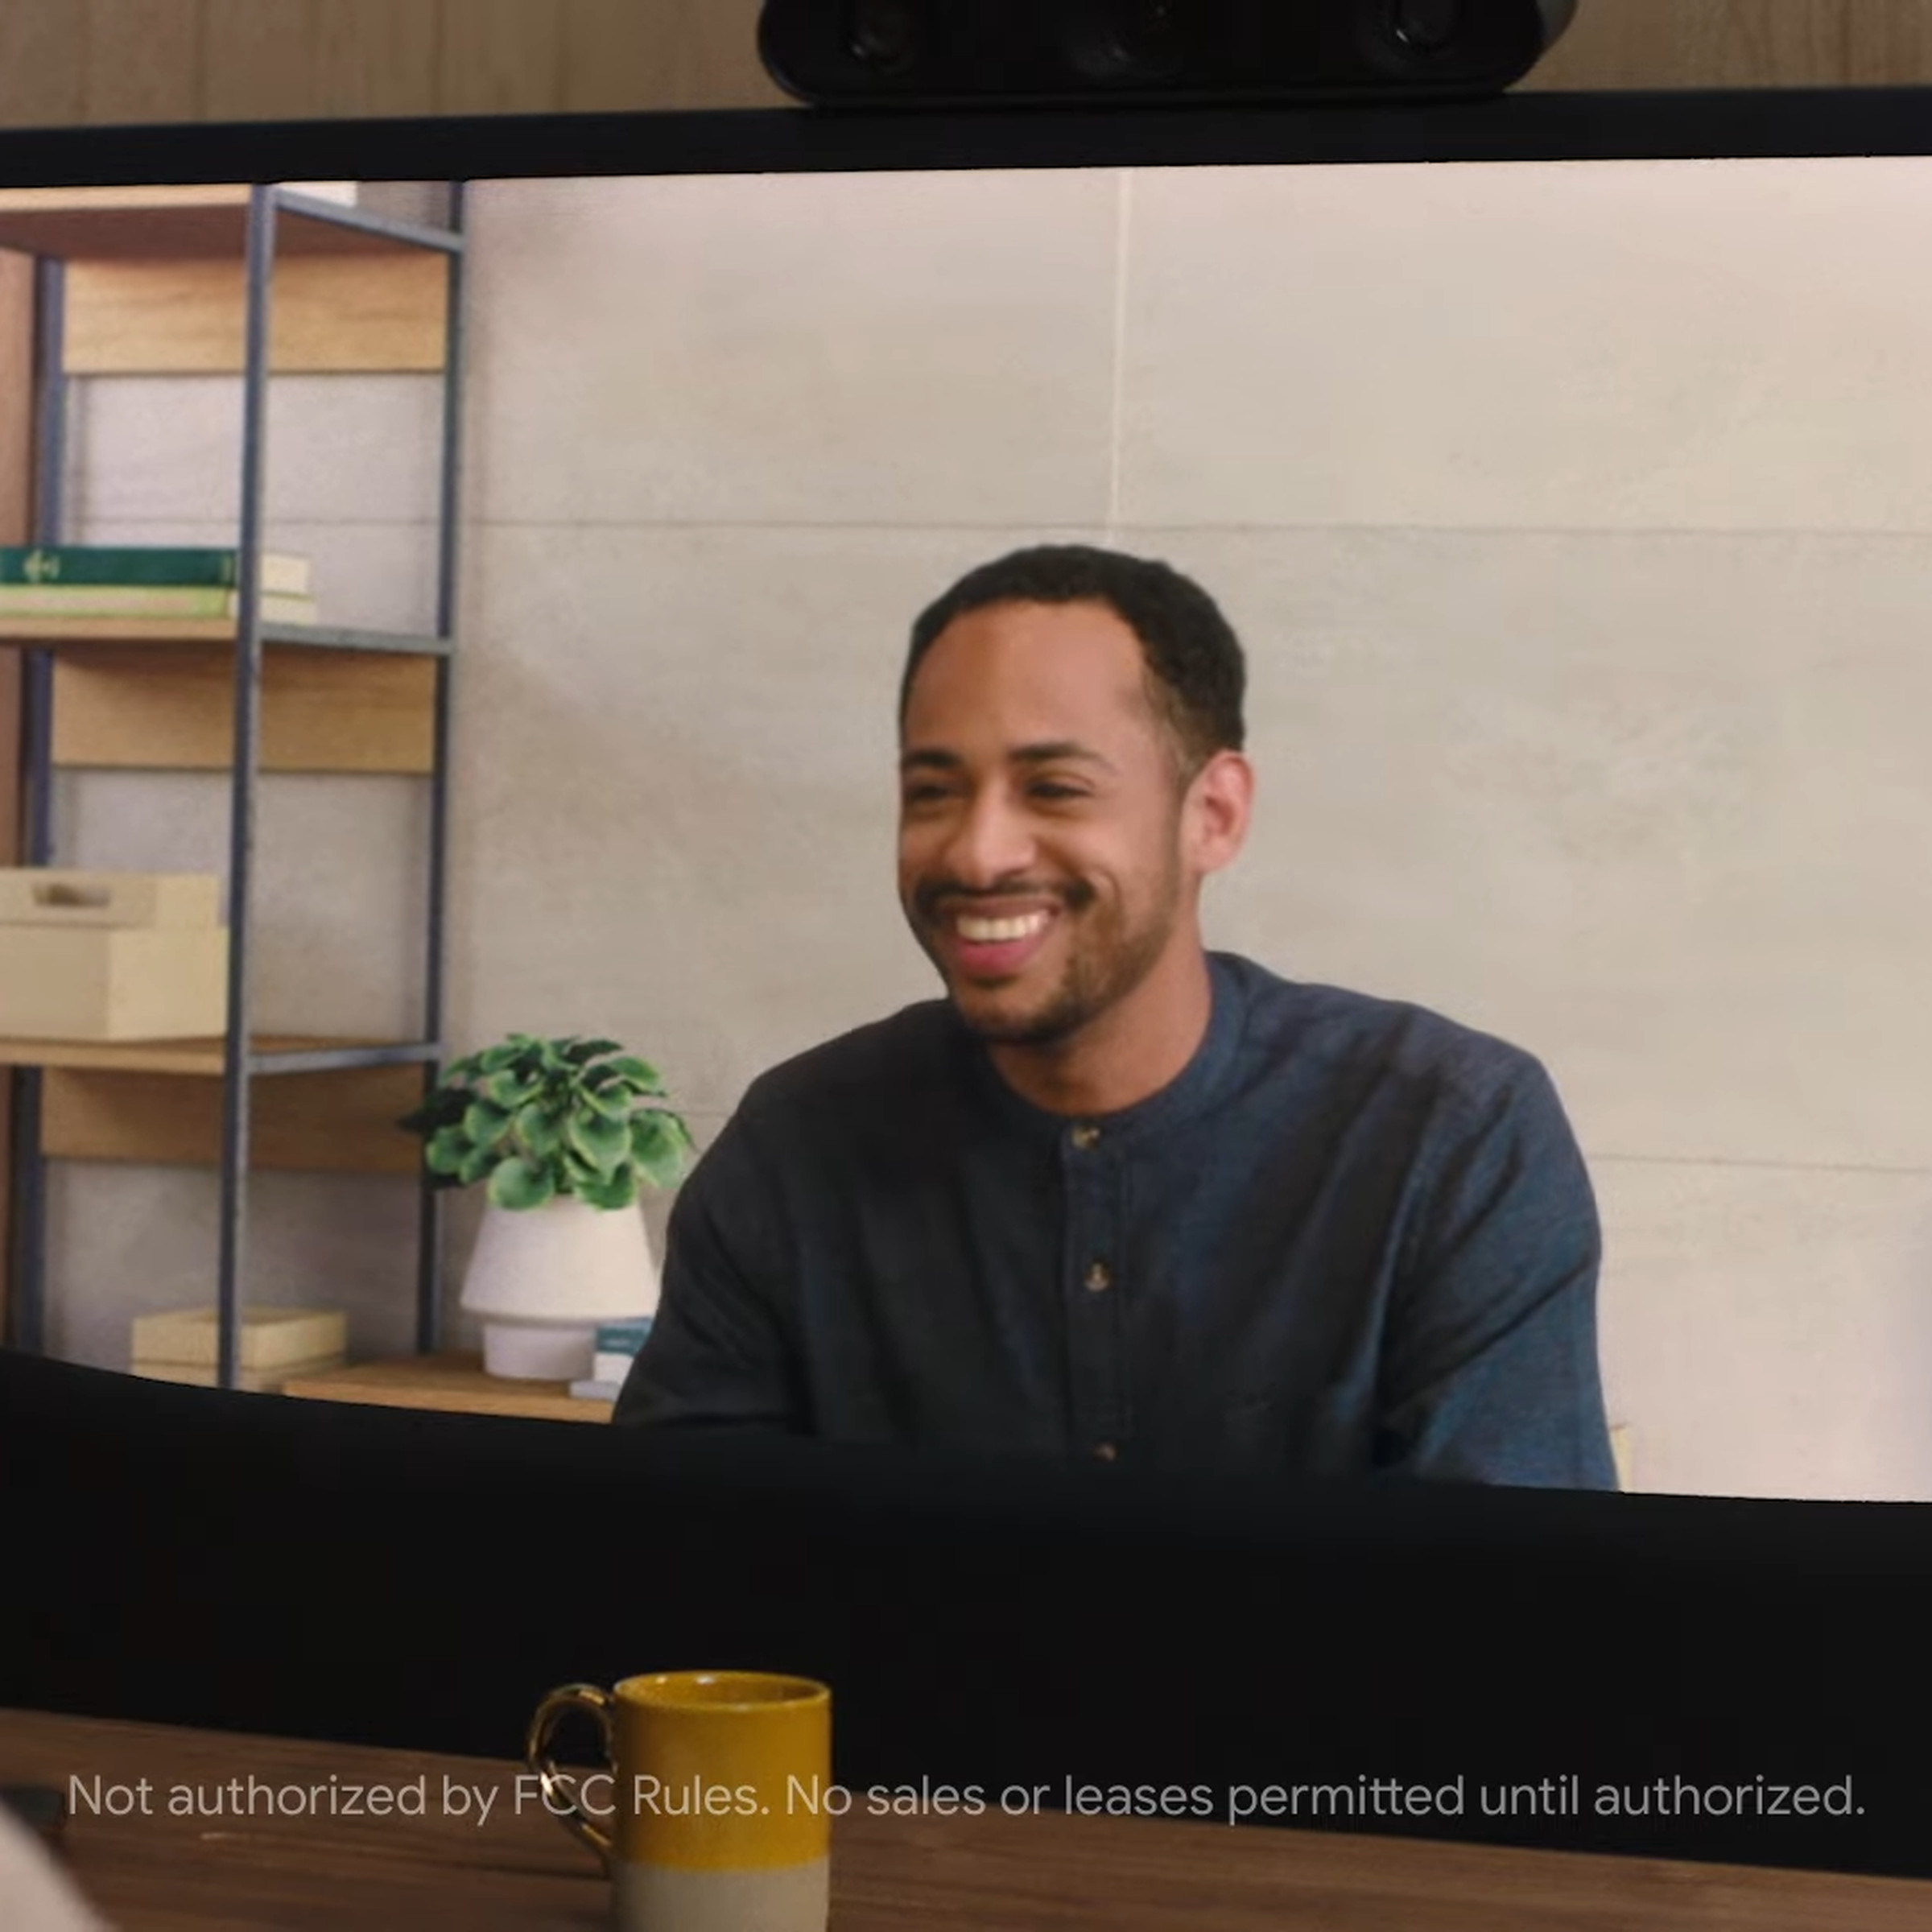 An image showing two people using Google’s Project Starline video conferencing technology